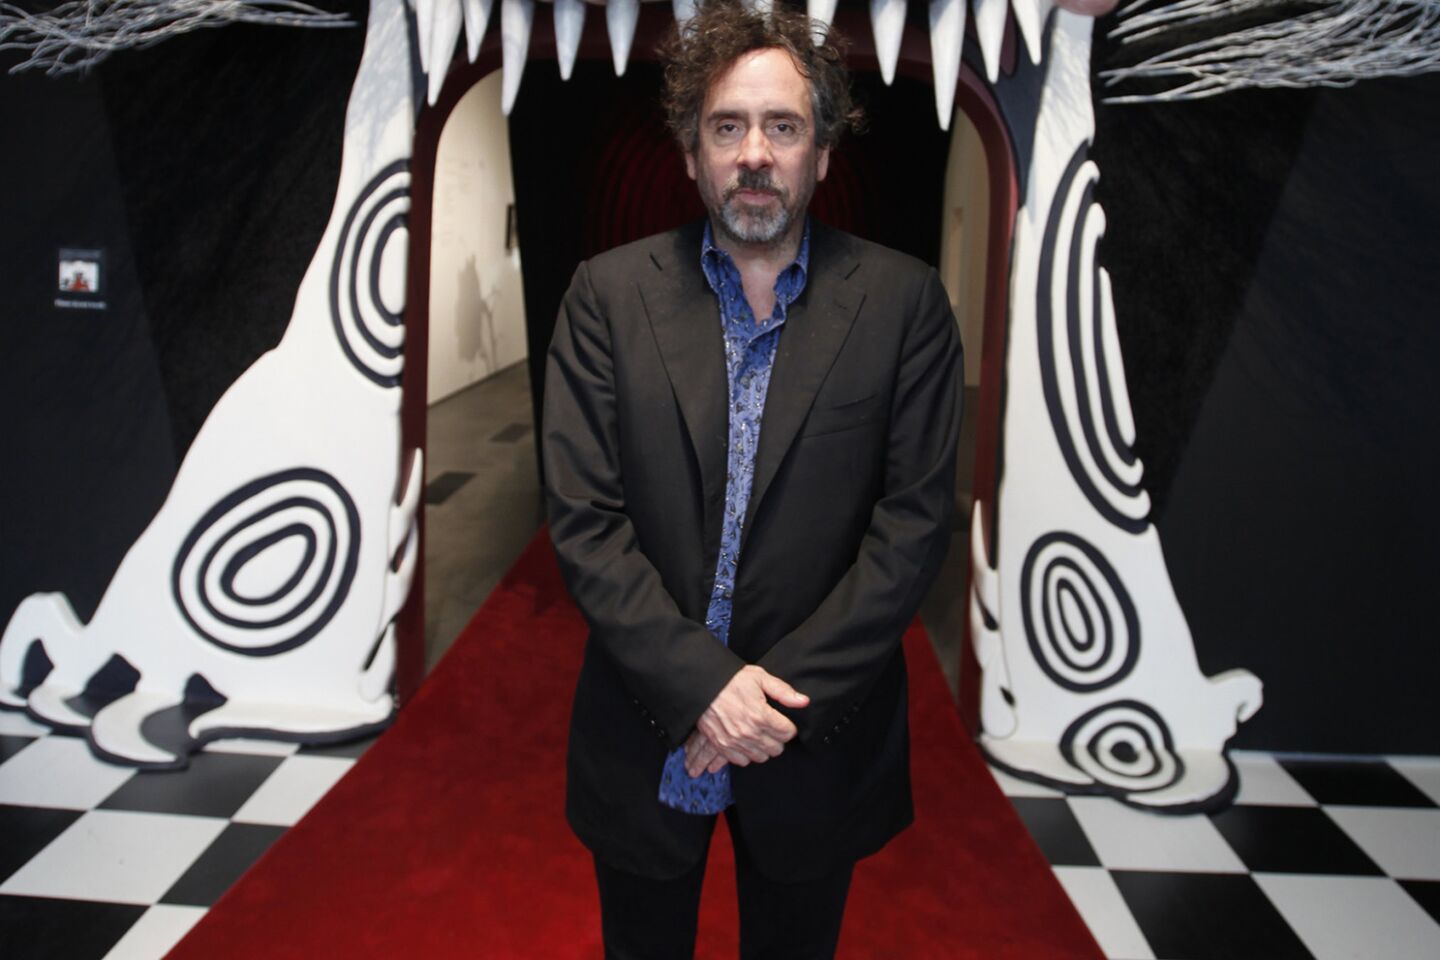 Arts and culture in pictures by The Times | Tim Burton